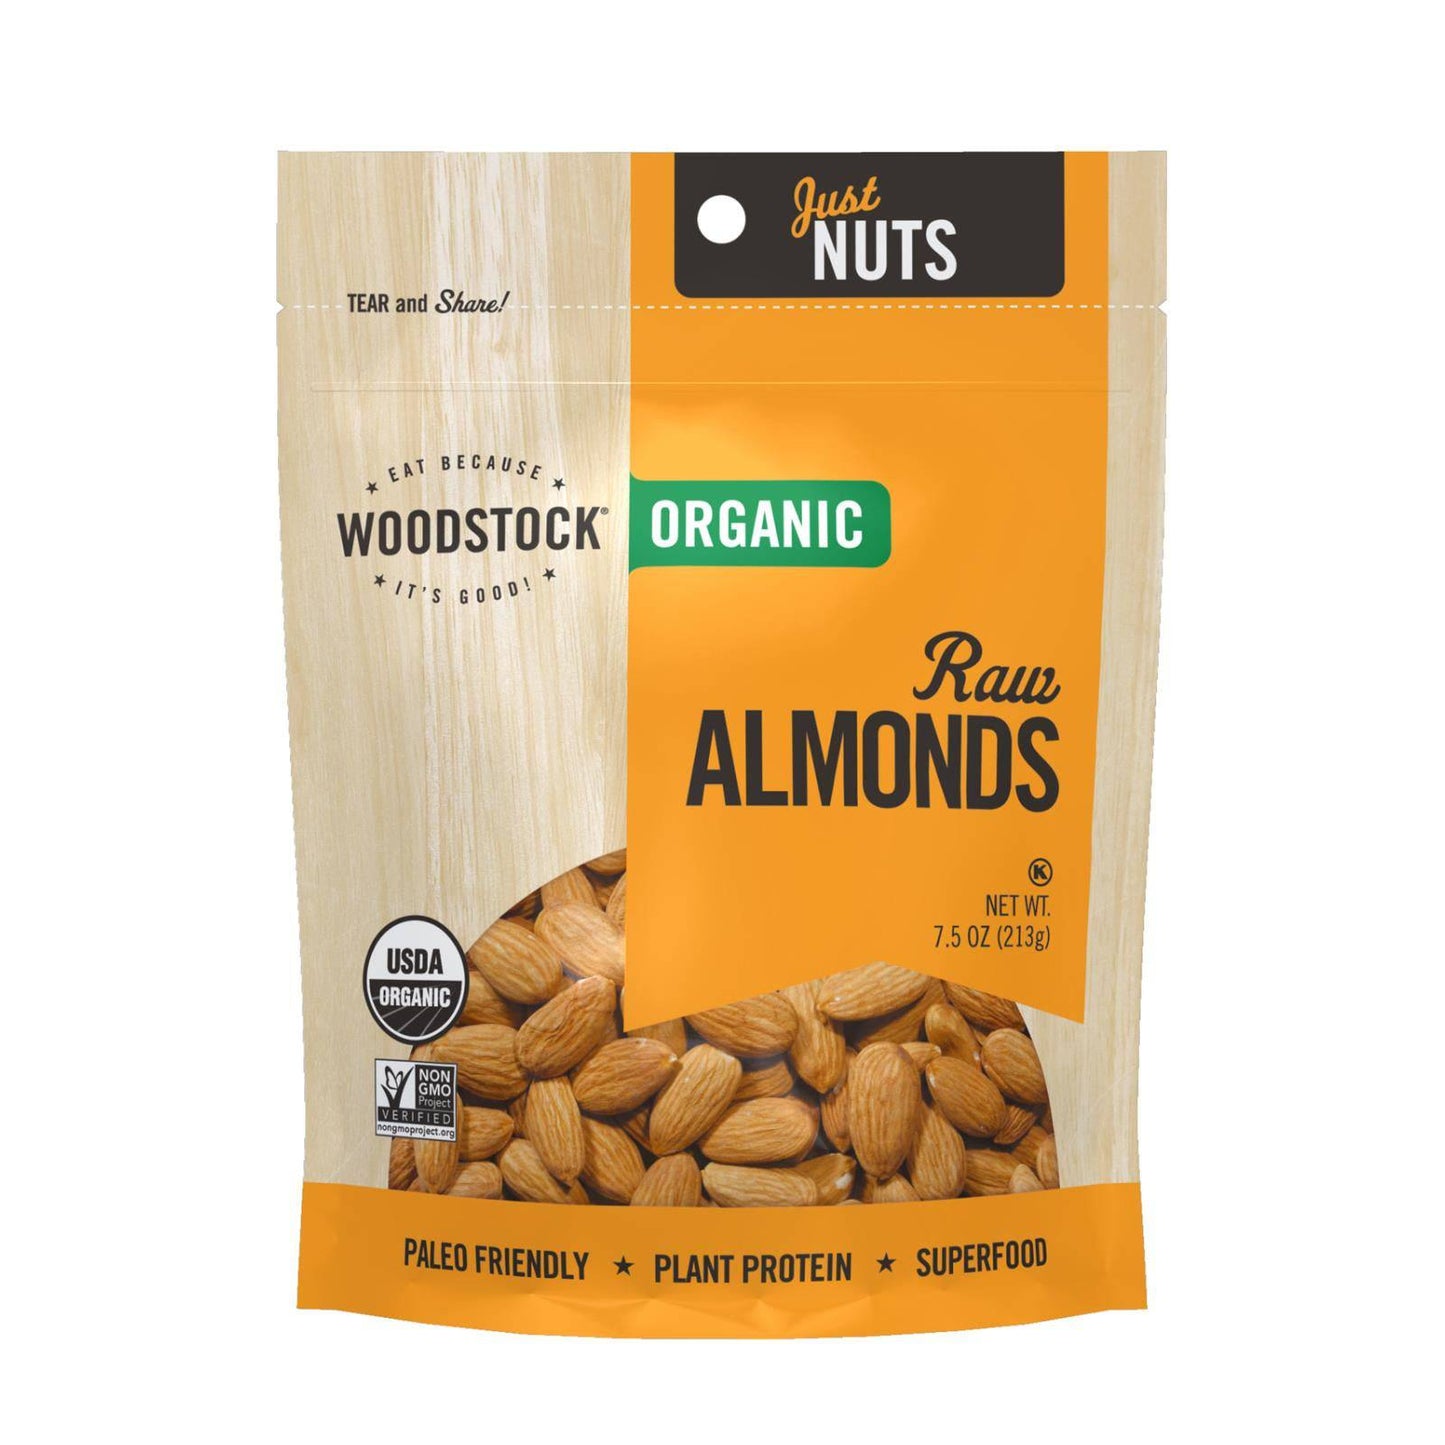 Woodstock Organic Raw Almonds - Case Of 8 - 7.5 Oz | OnlyNaturals.us